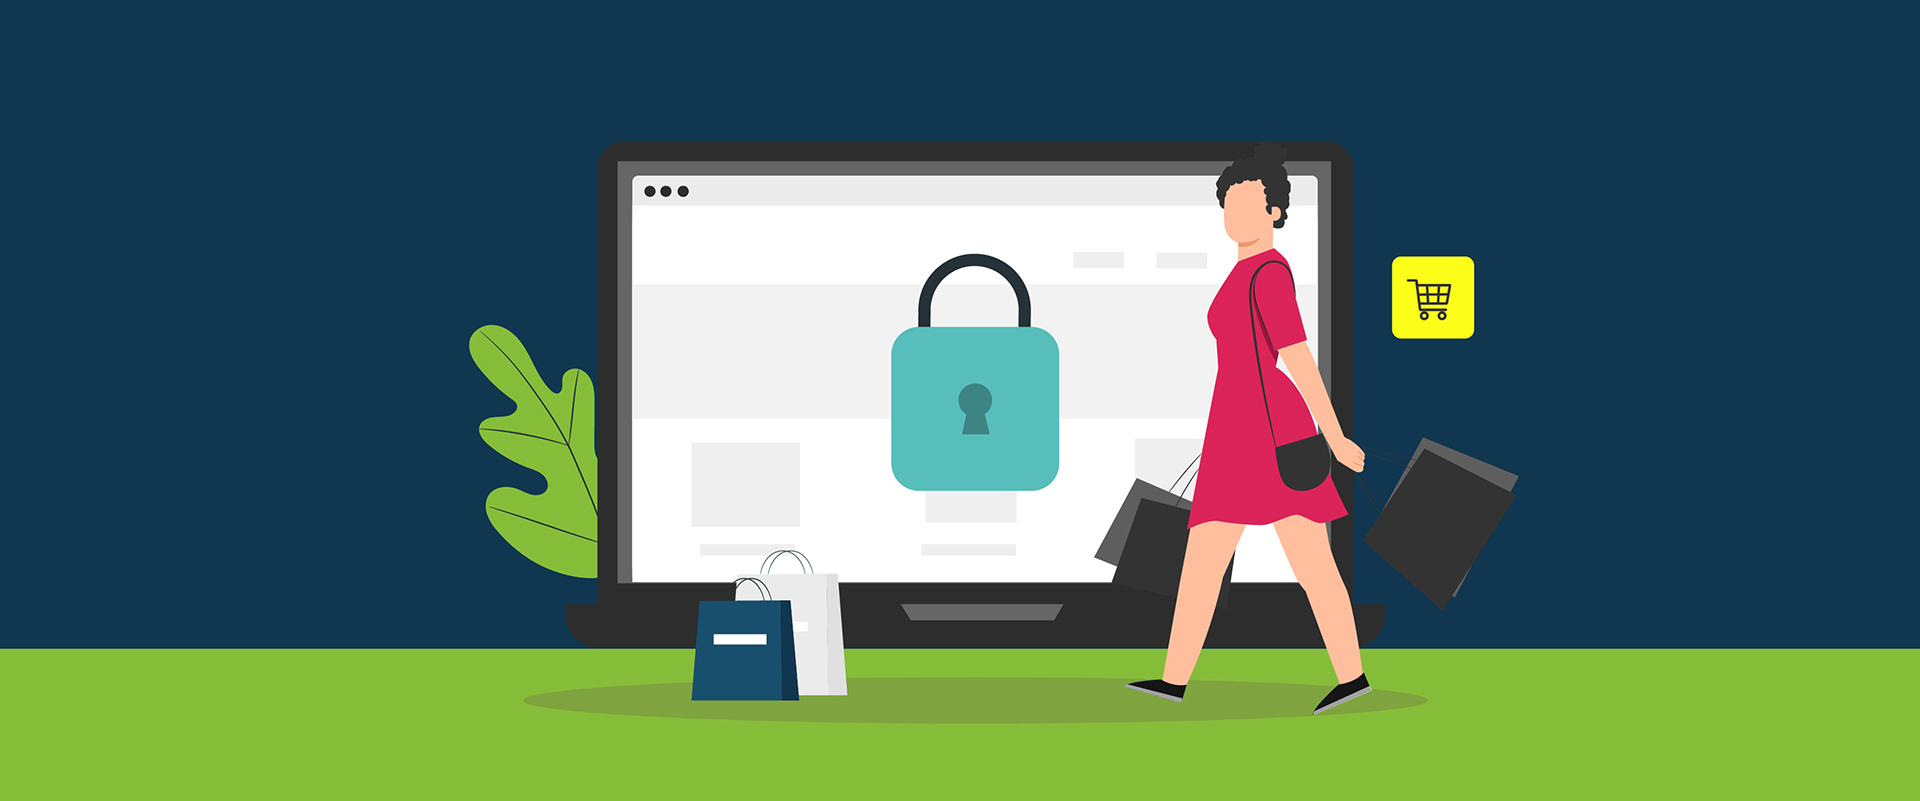 2023 Trends for Retail: Cybersecurity and Omnichannel Business